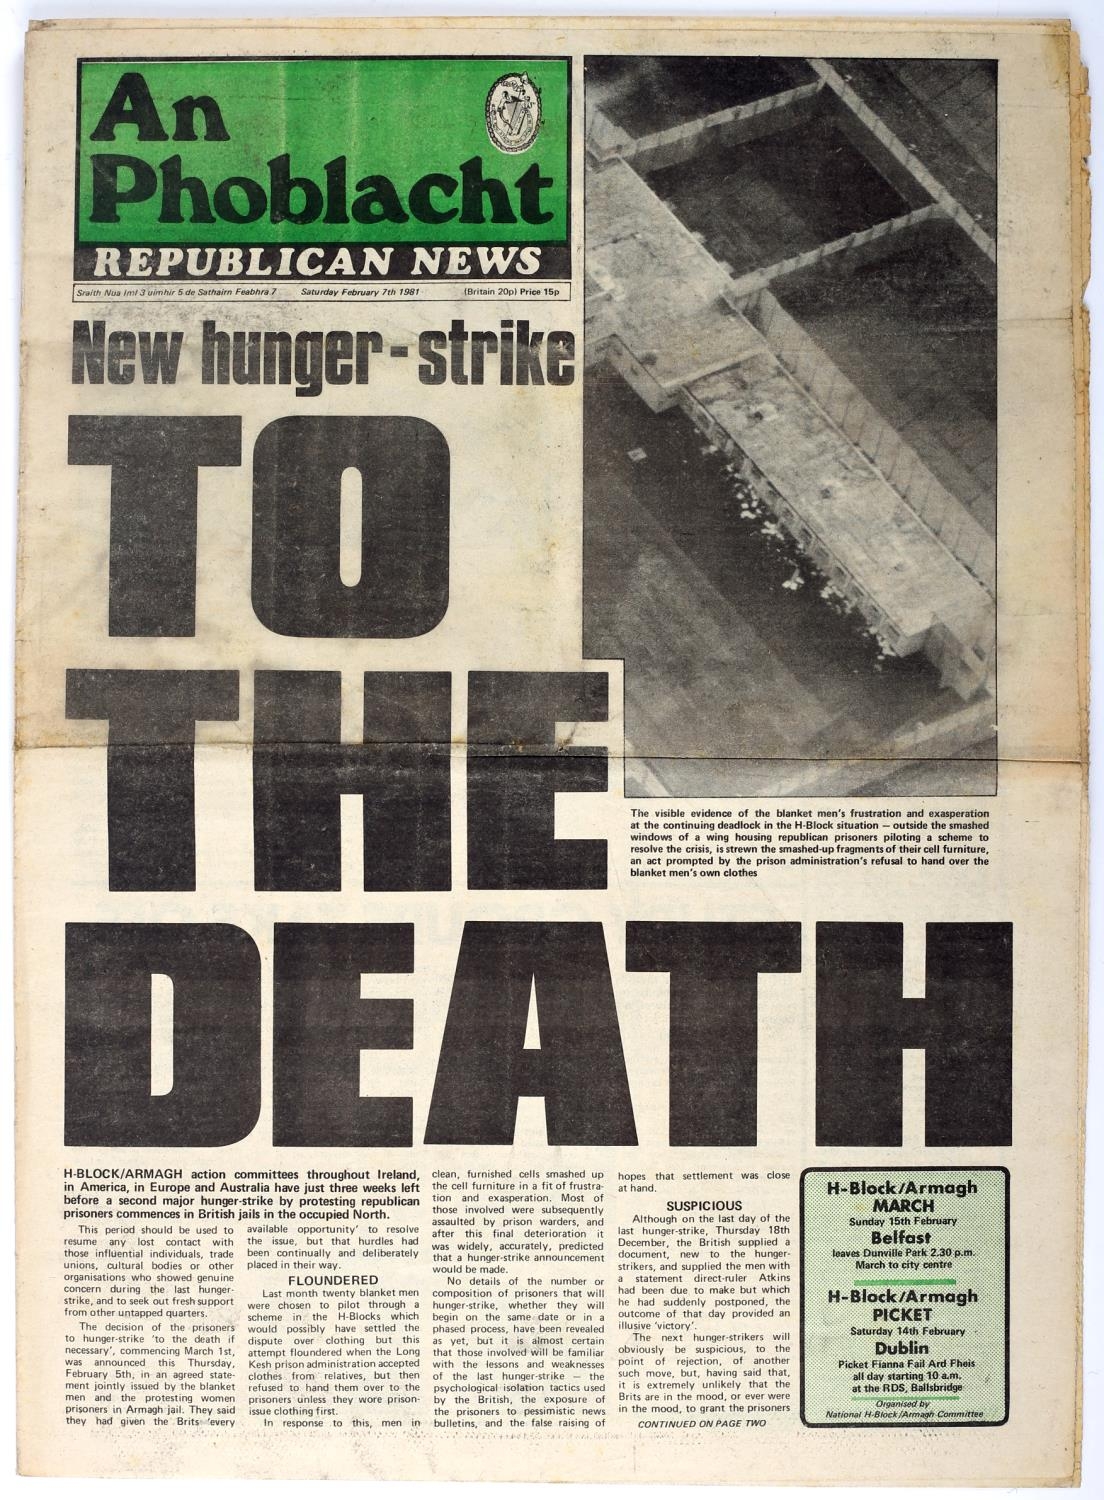 An Phoblacht/Republican News. 1981, all 50 issues of the weekly newspaper published that year.